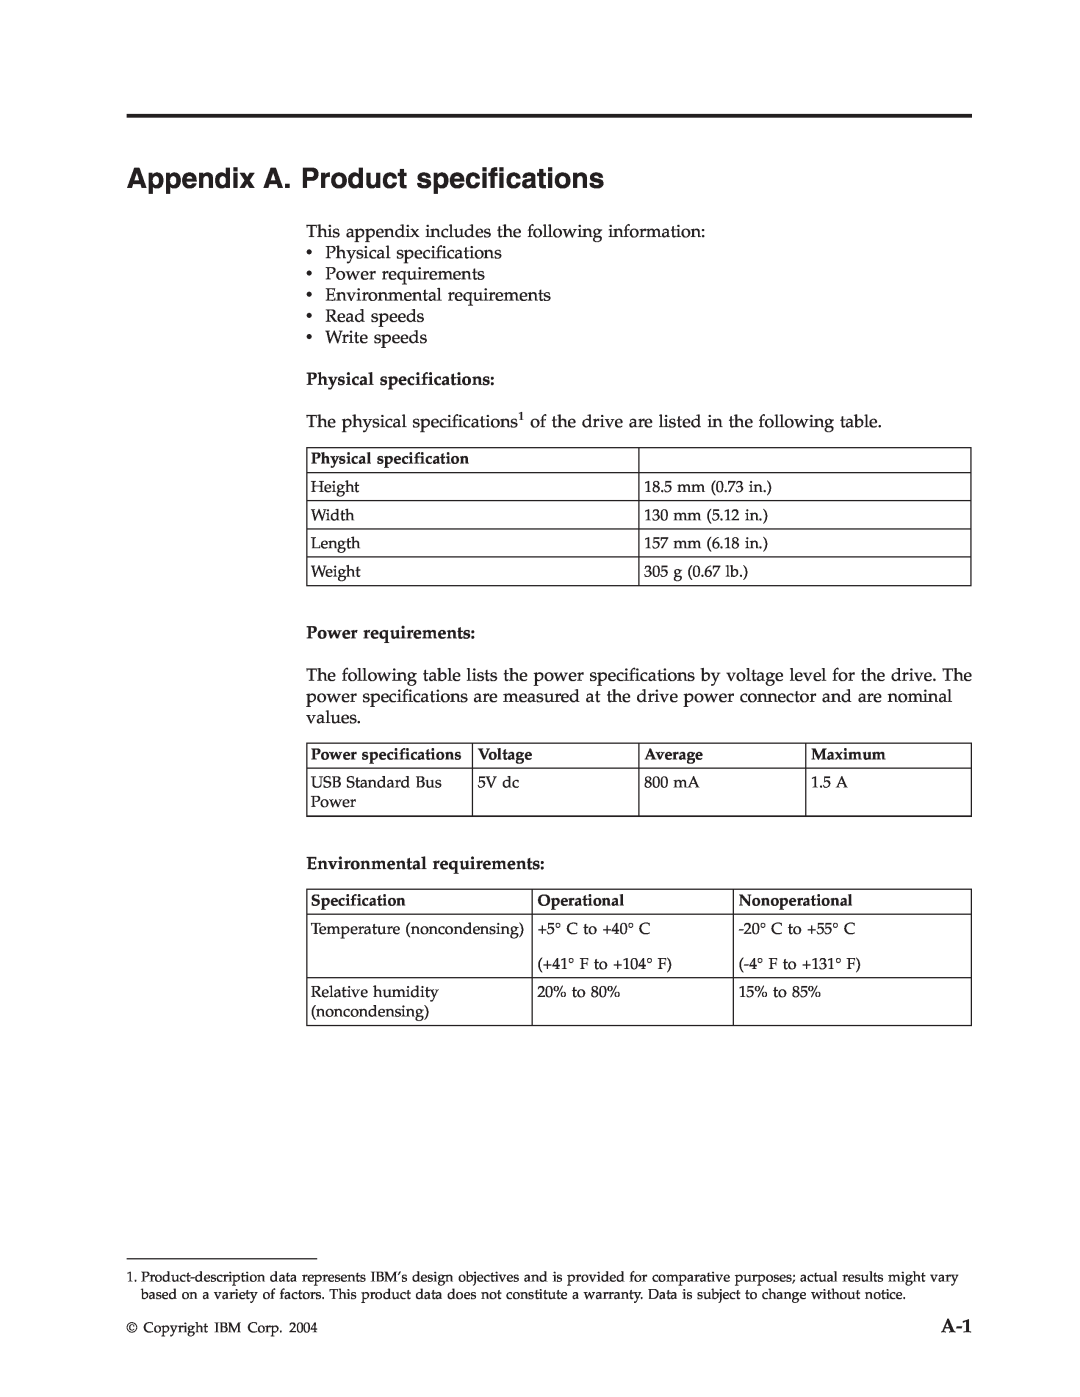 IBM 73P4518 Appendix A. Product specifications, Physical specifications, Power requirements, Environmental requirements 